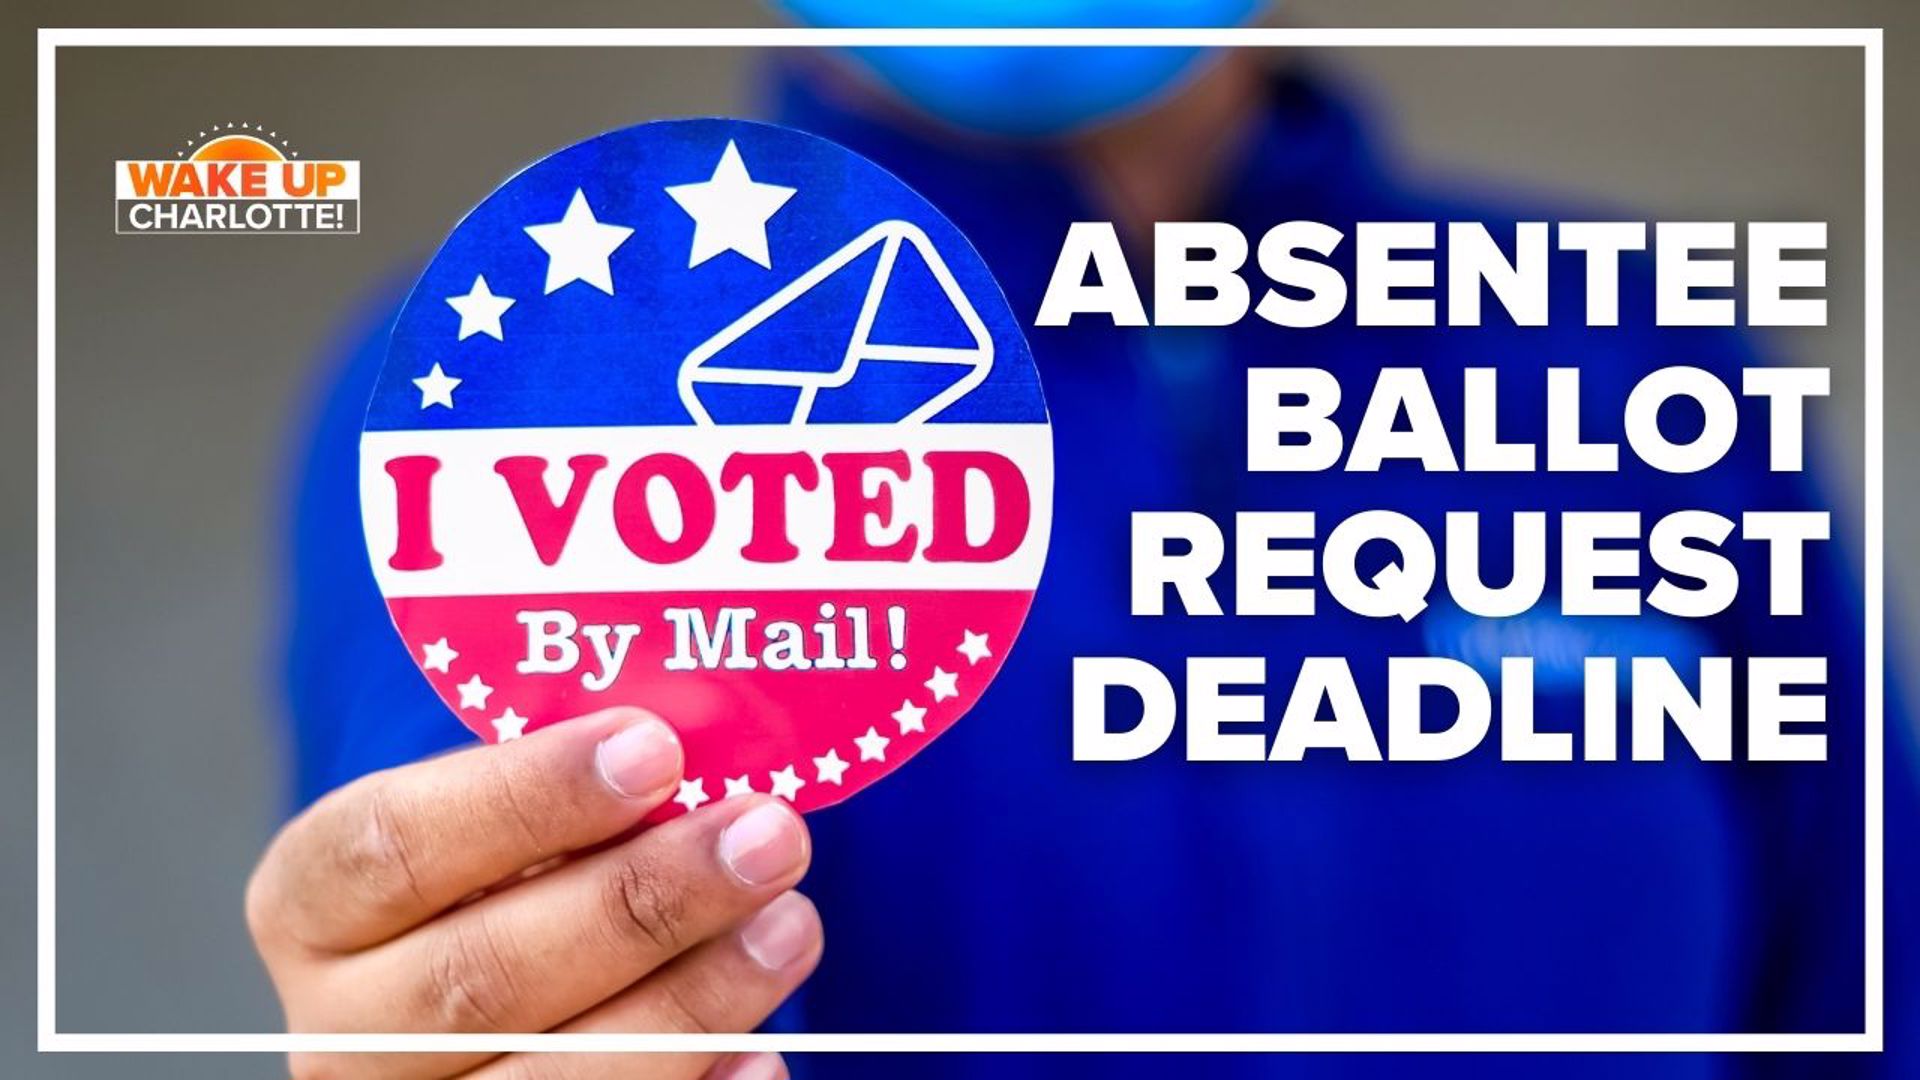 Tuesday, May 10, is the deadline to request an absentee ballot to vote by mail in the North Carolina primary election.